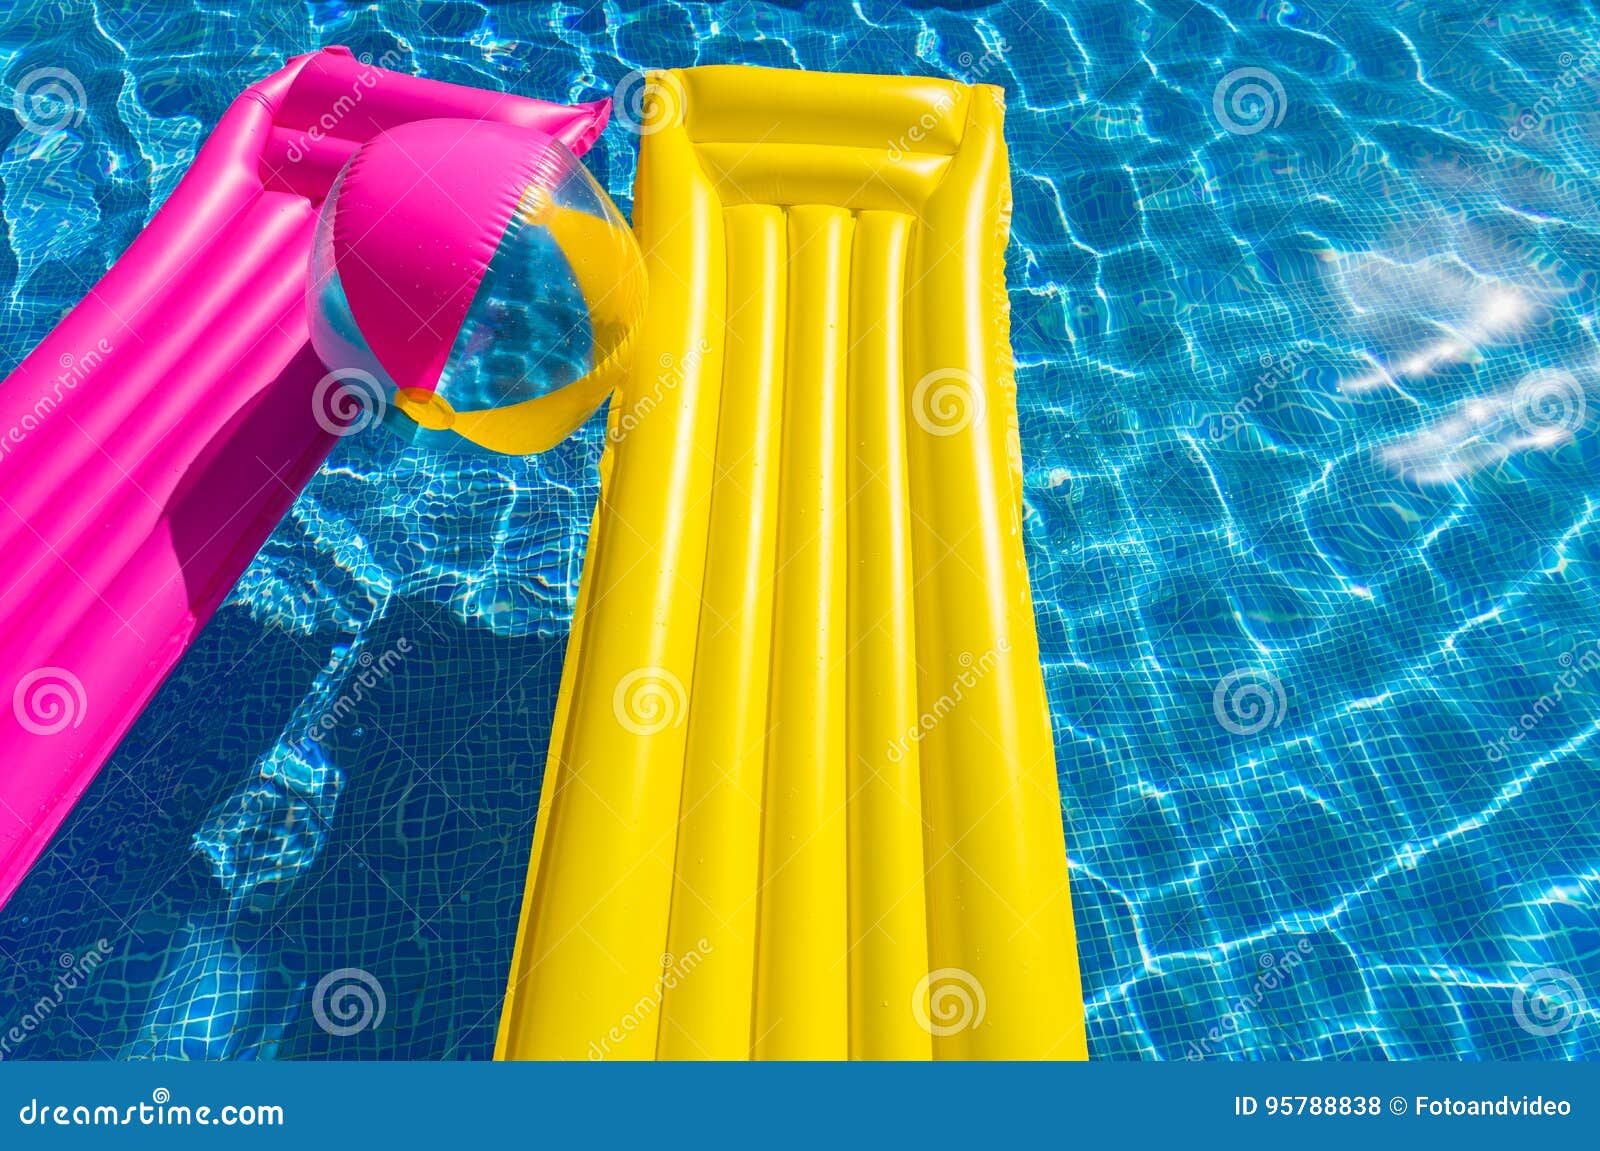 Swimming Pool with Air Mattress and Beachball Stock Photo - Image of ...